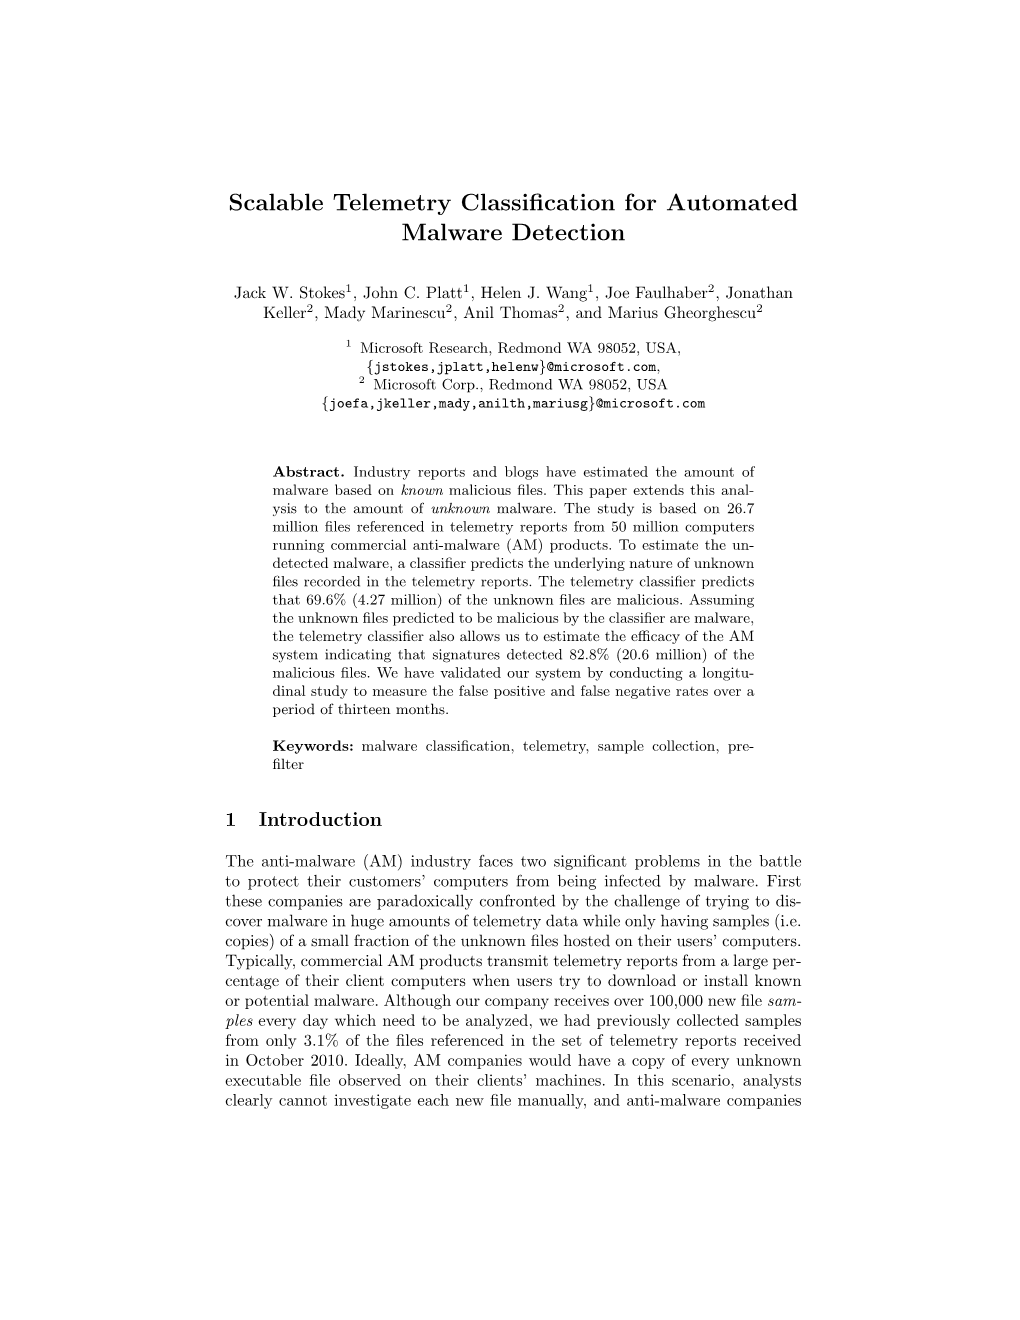 Scalable Telemetry Classification for Automated Malware Detection